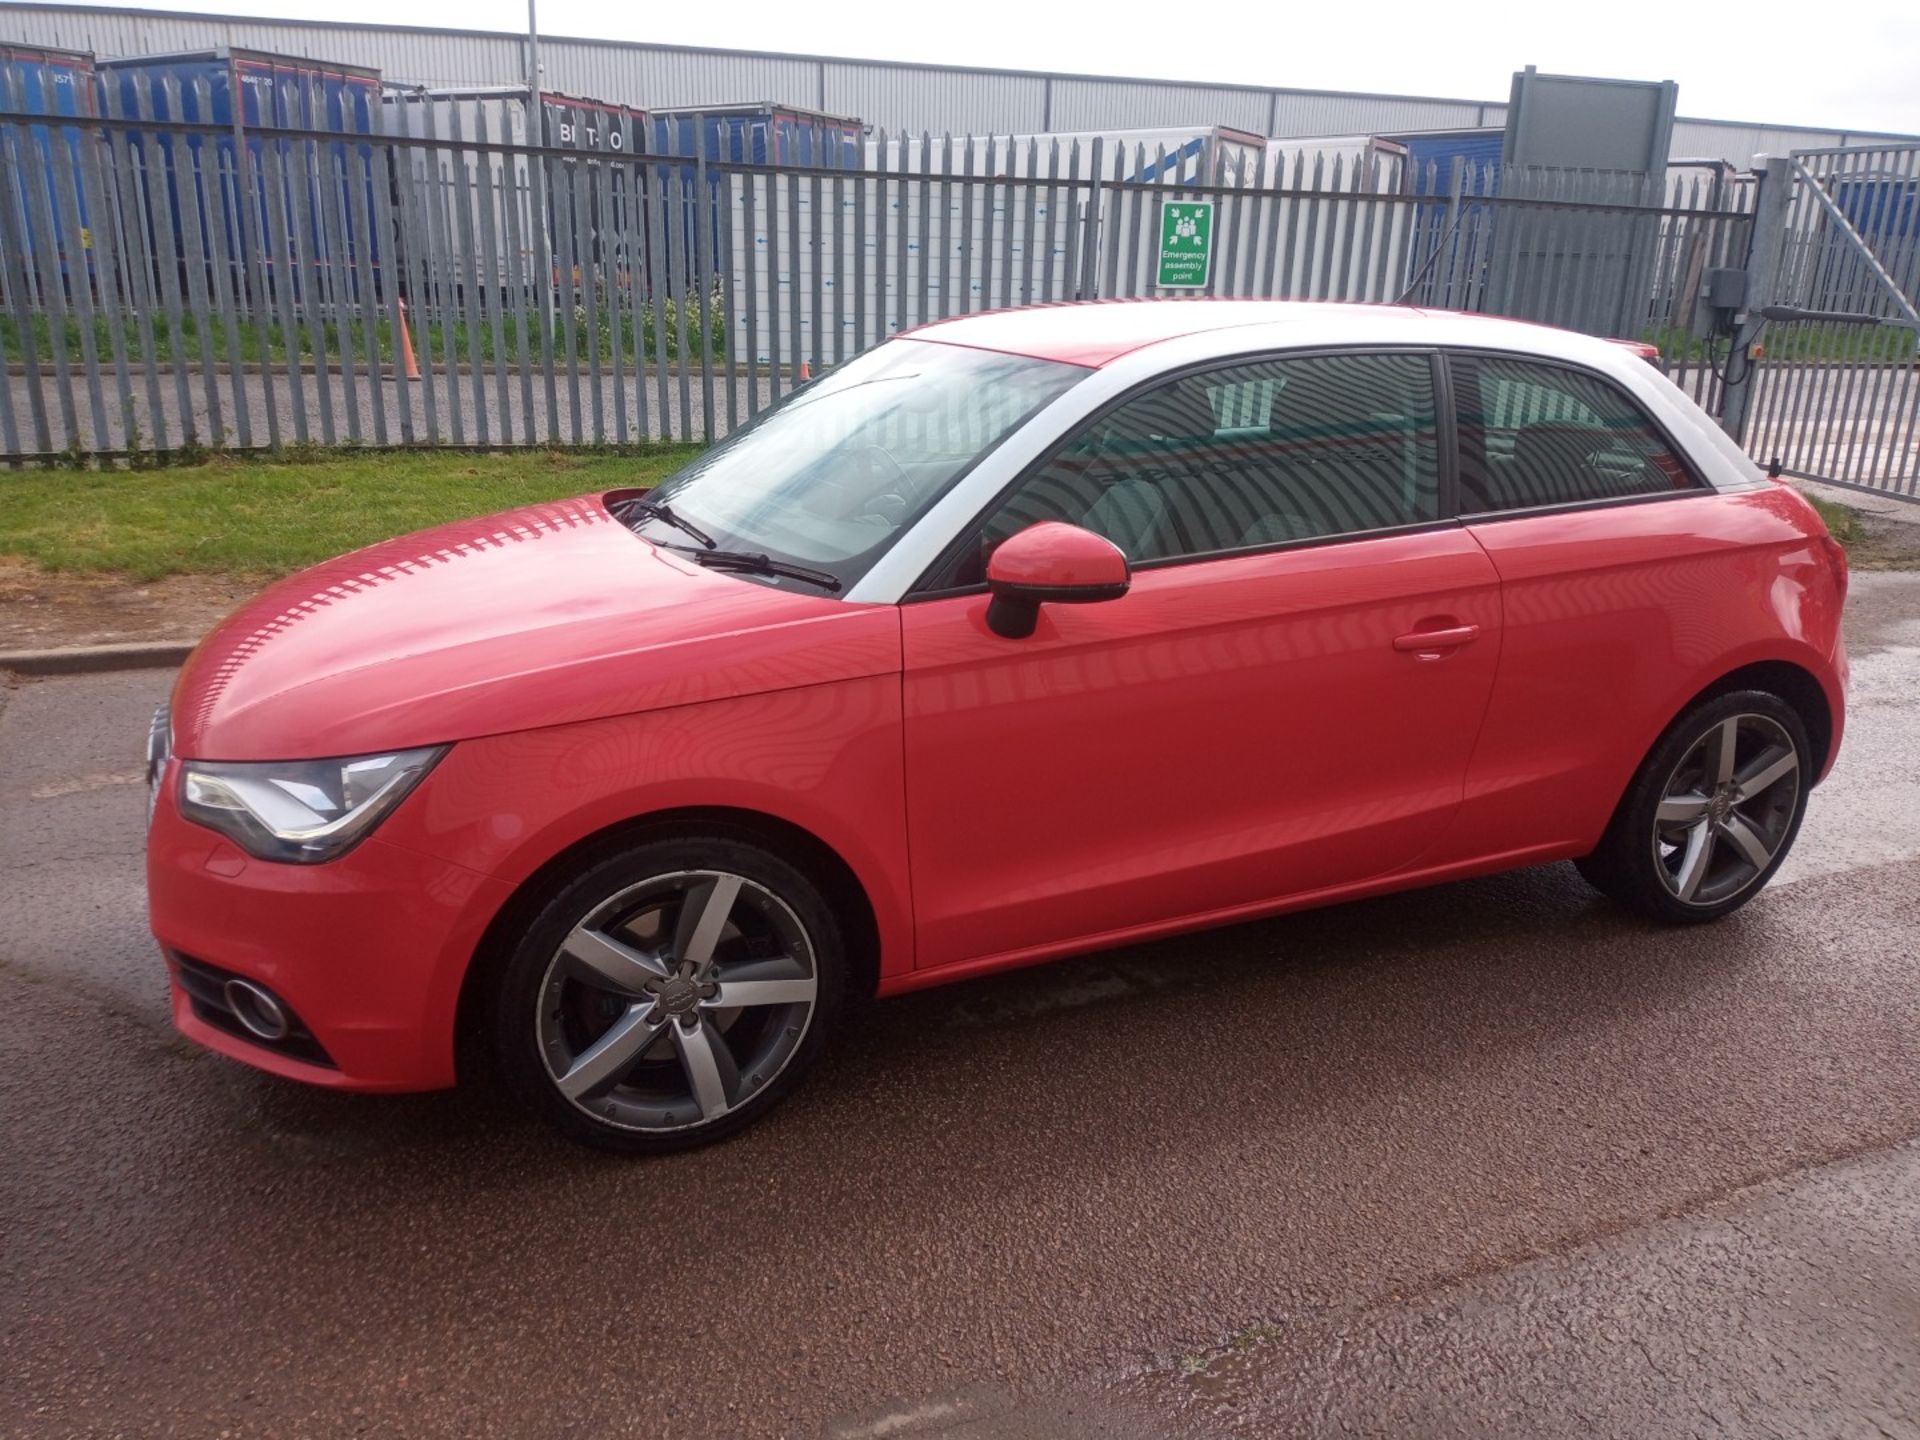 2010 Audi A1 Sport Tfsi 1.4 Petrol Hatchback - CL505 - NO VAT ON THE HAMMER - Location: Corby, North - Image 3 of 16